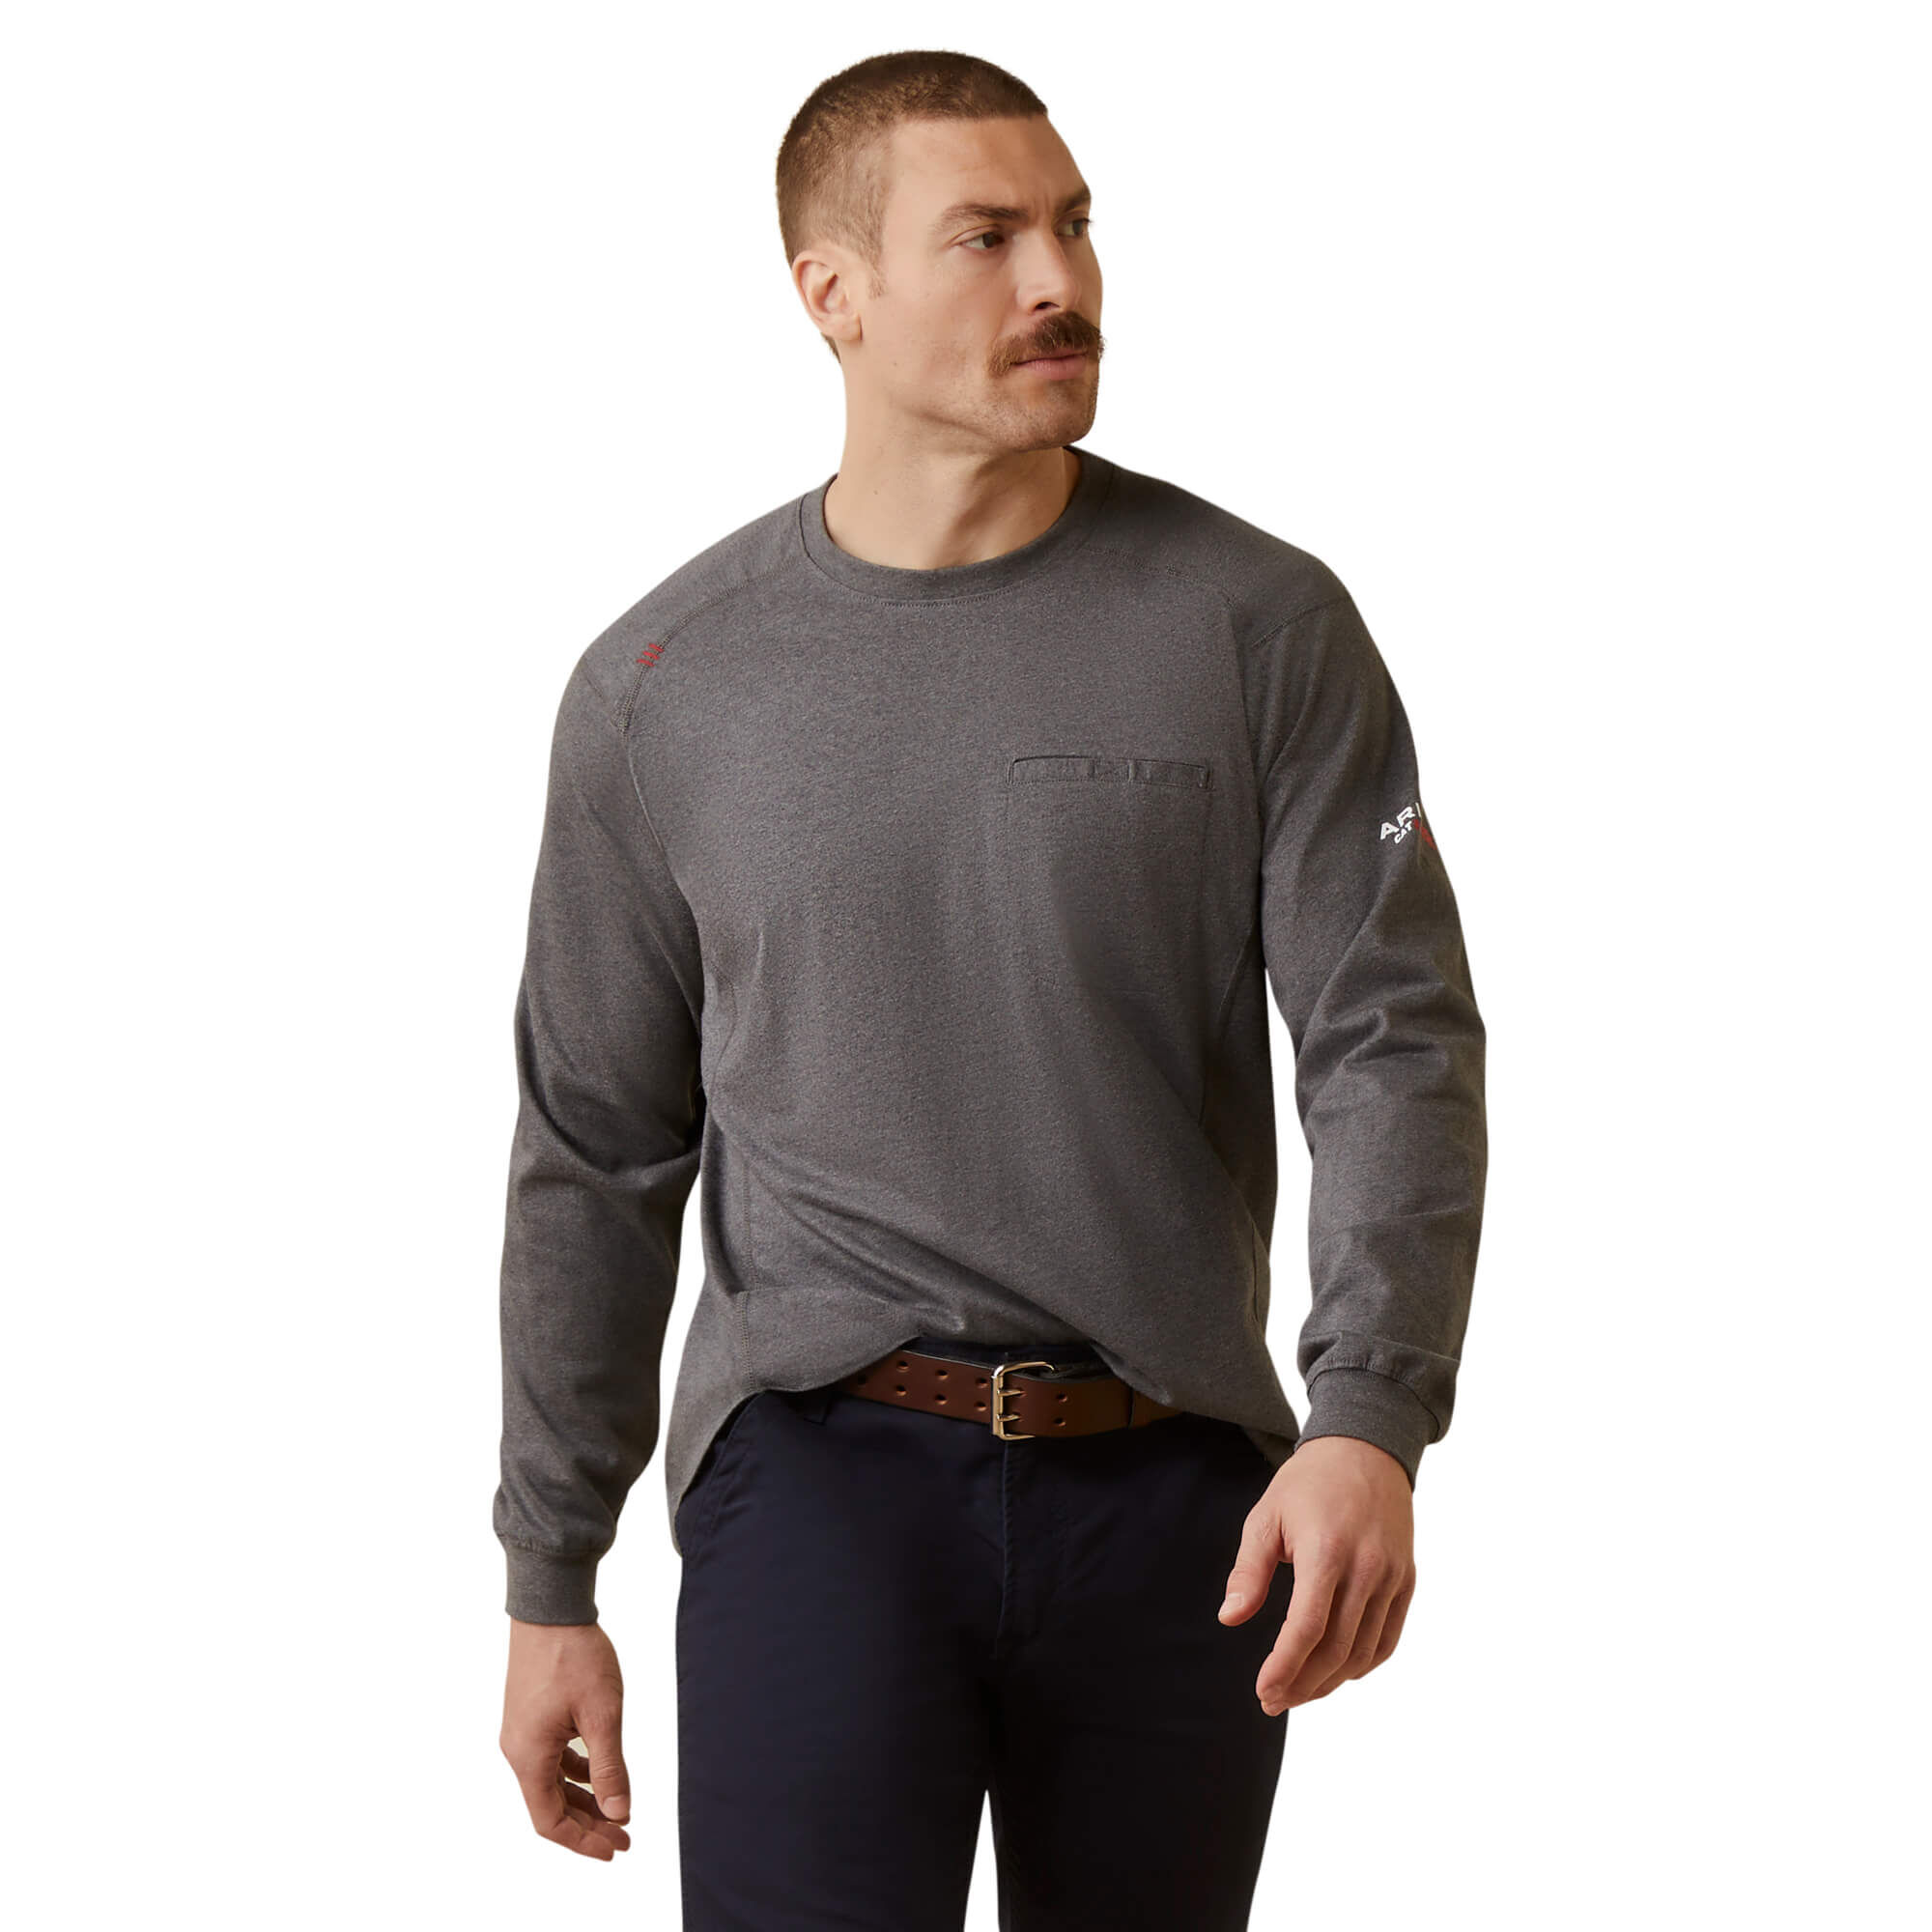 Men's FR Air True Grit T-Shirt in Charcoal Heather, Size: Large_Tall by  Ariat